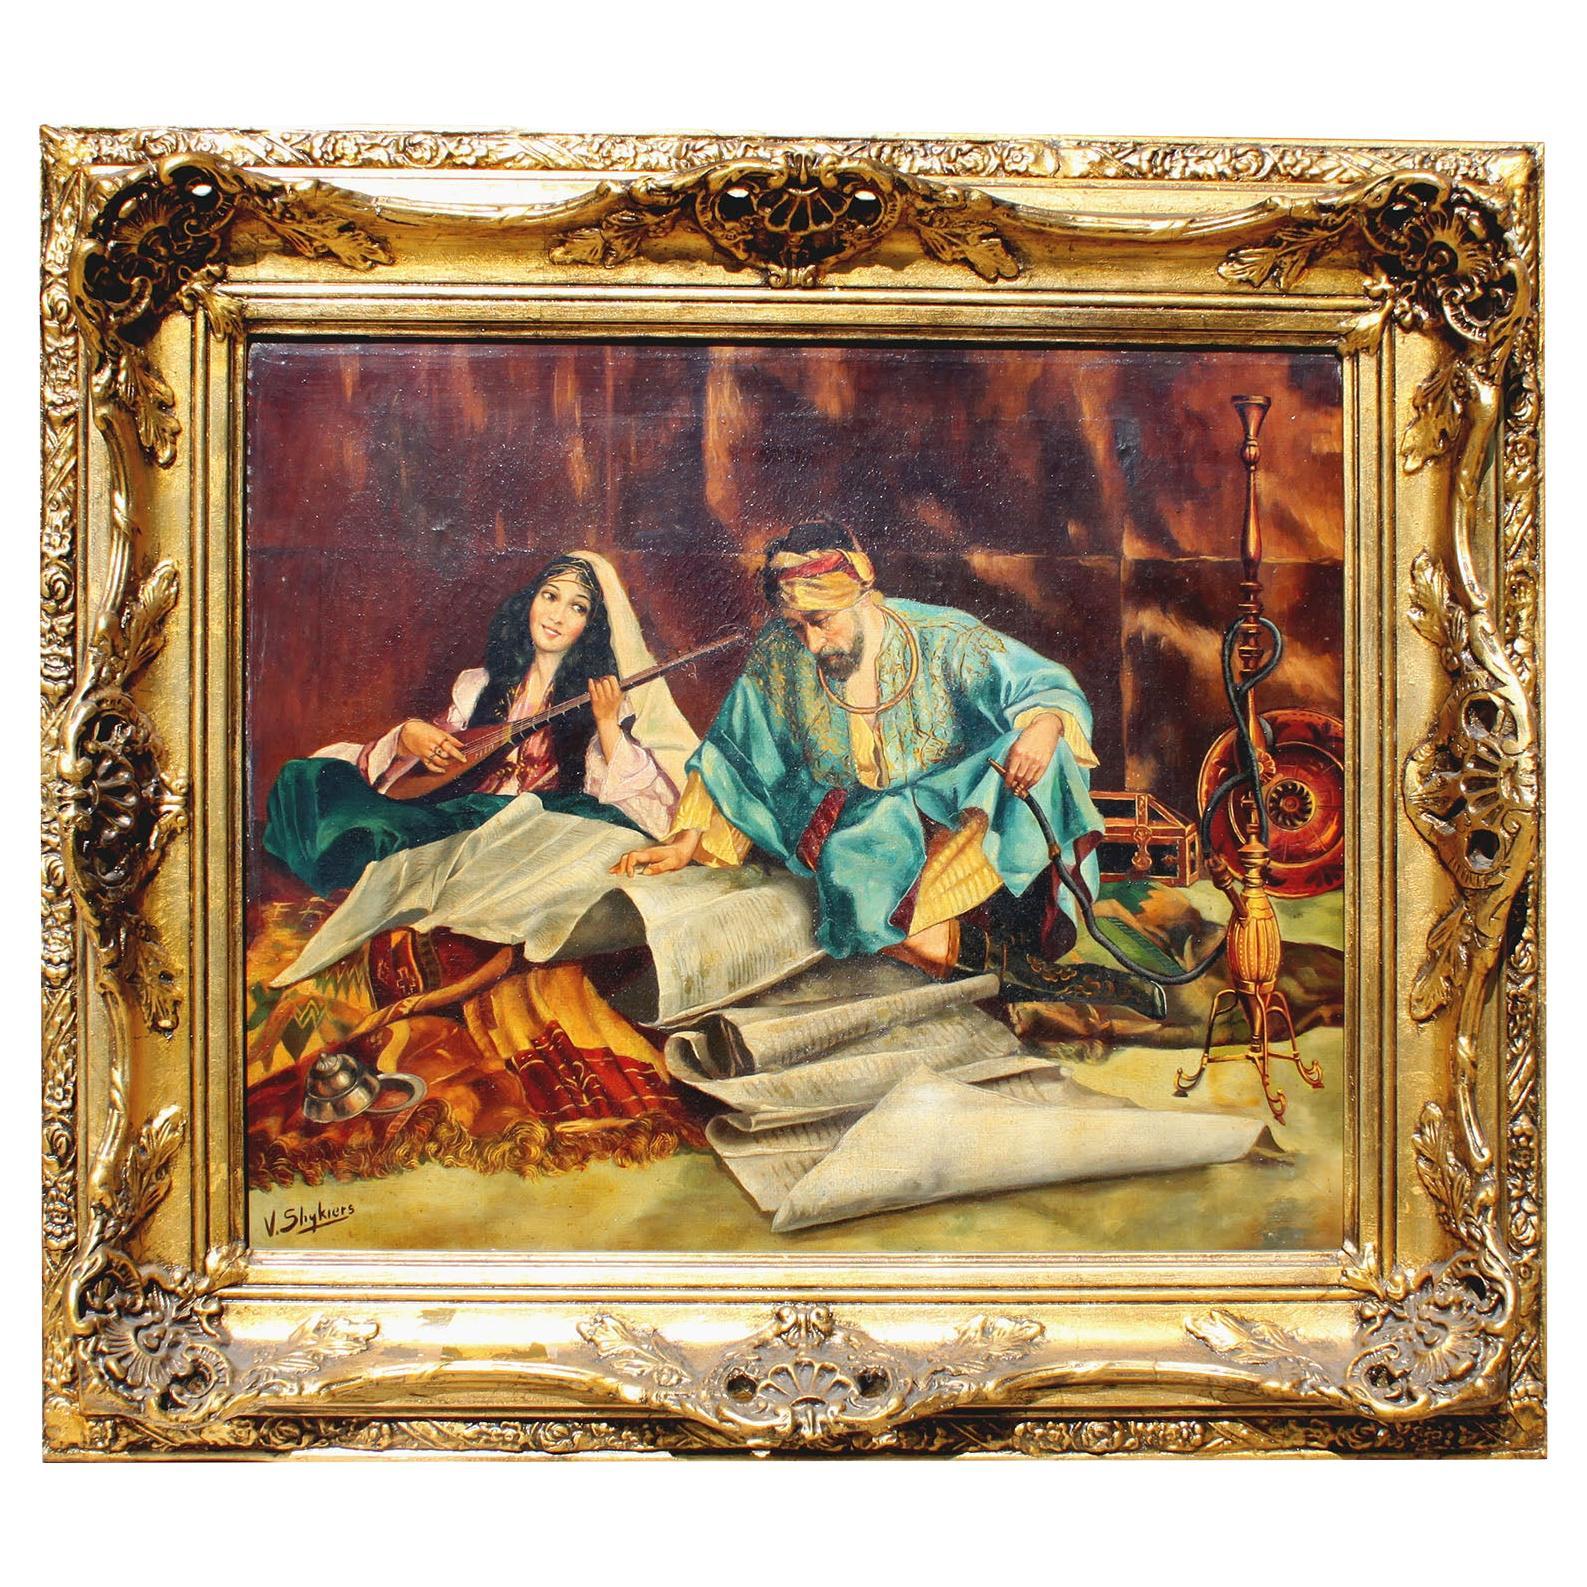 Early 20th Century Orientalist Oil on Canvas Titled 'The Master's Favorite' For Sale